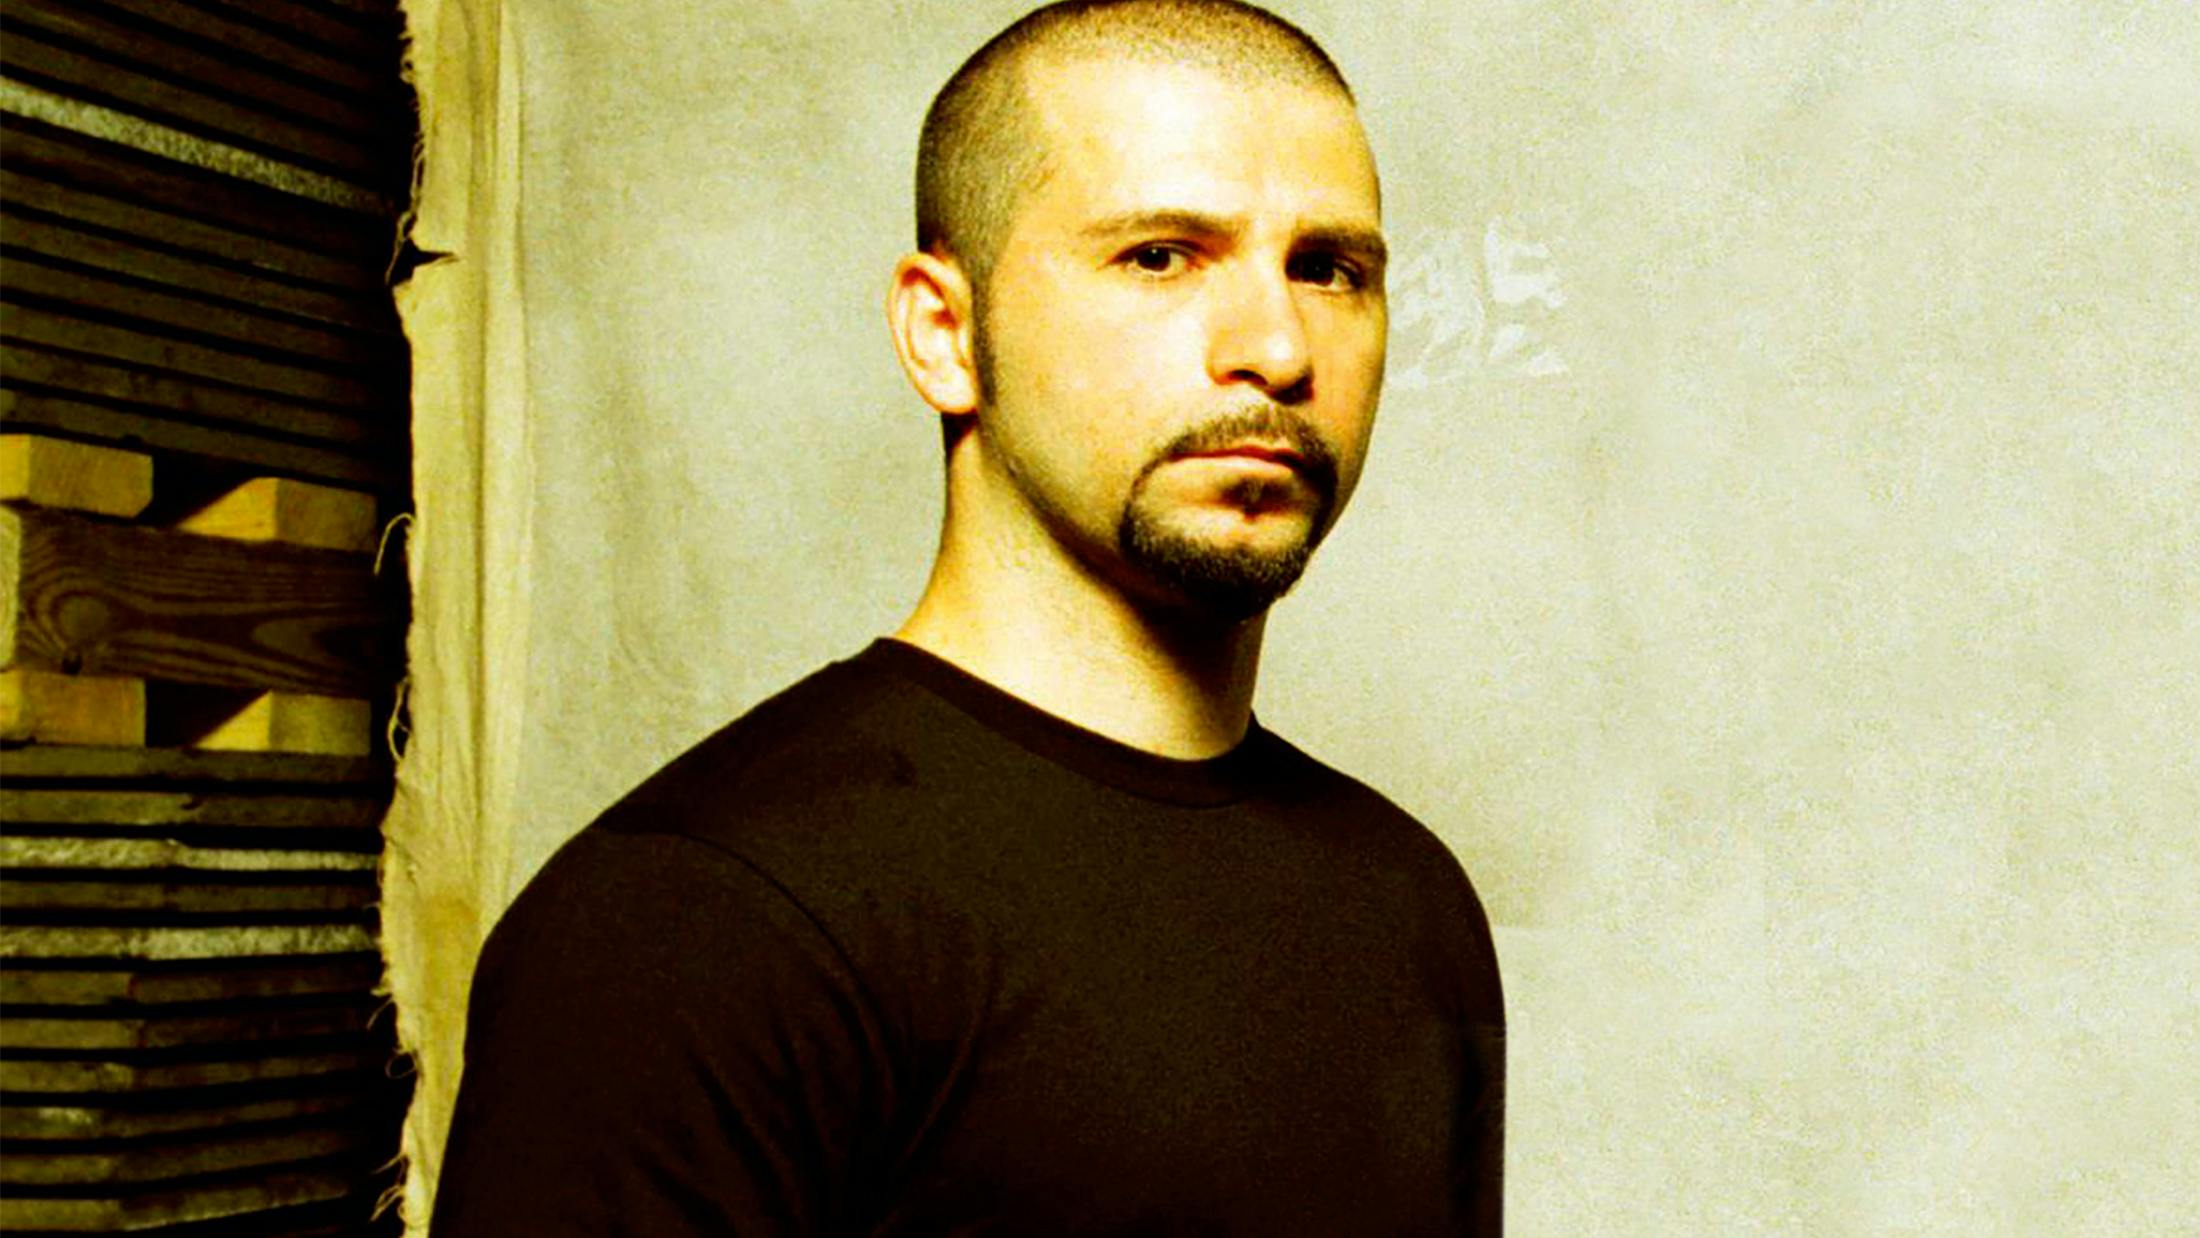 John Dolmayan: "My Stuff Doesn’t Compare Or Compete With System… It’s Just Something I’ve Done For Enjoyment"